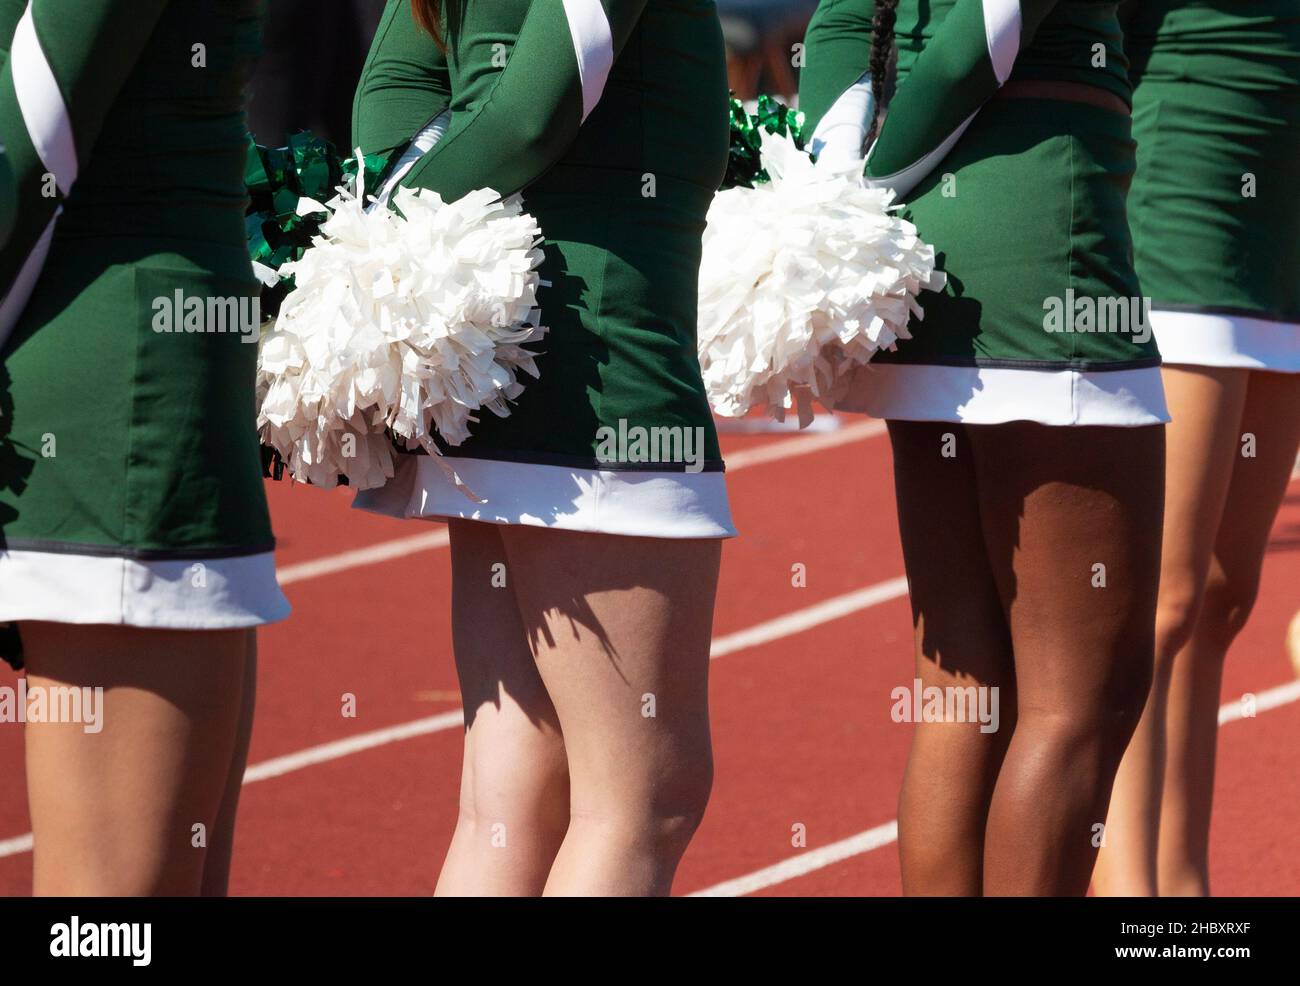 Close up of cheerleaders in green uniforms holding white pom poms behind backs. Stock Photo